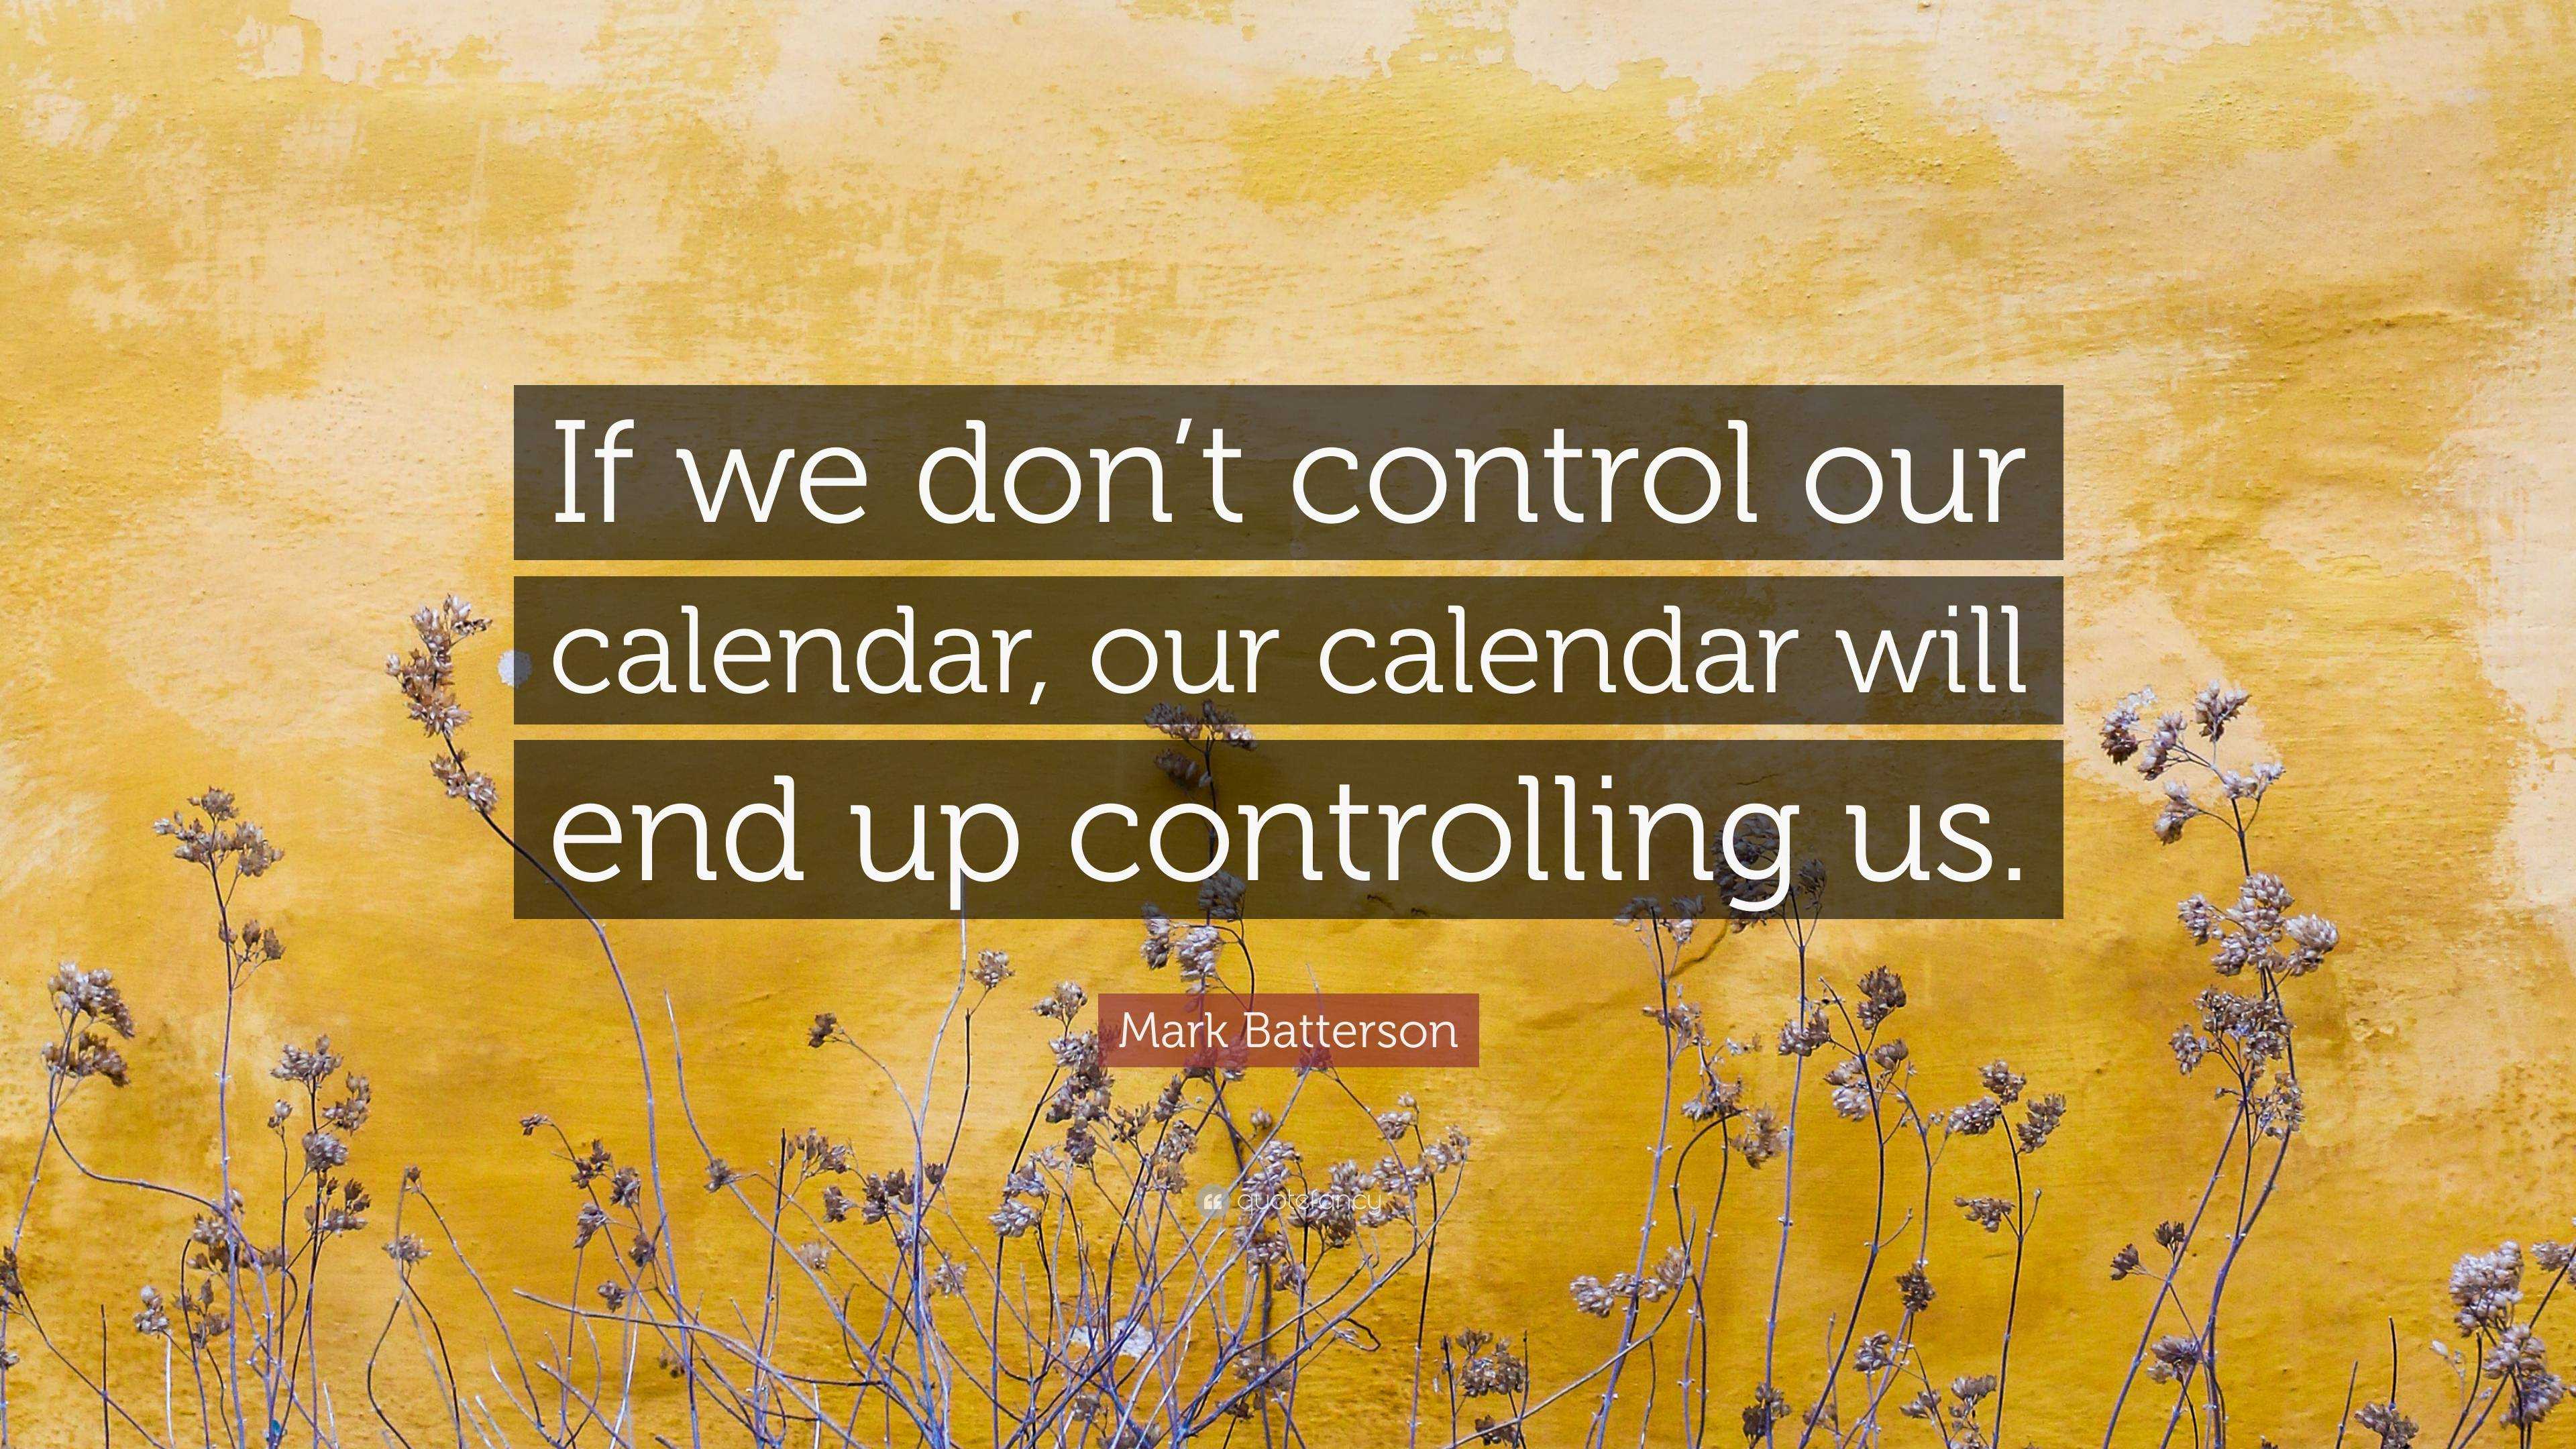 Mark Batterson Quote “If we don’t control our calendar, our calendar